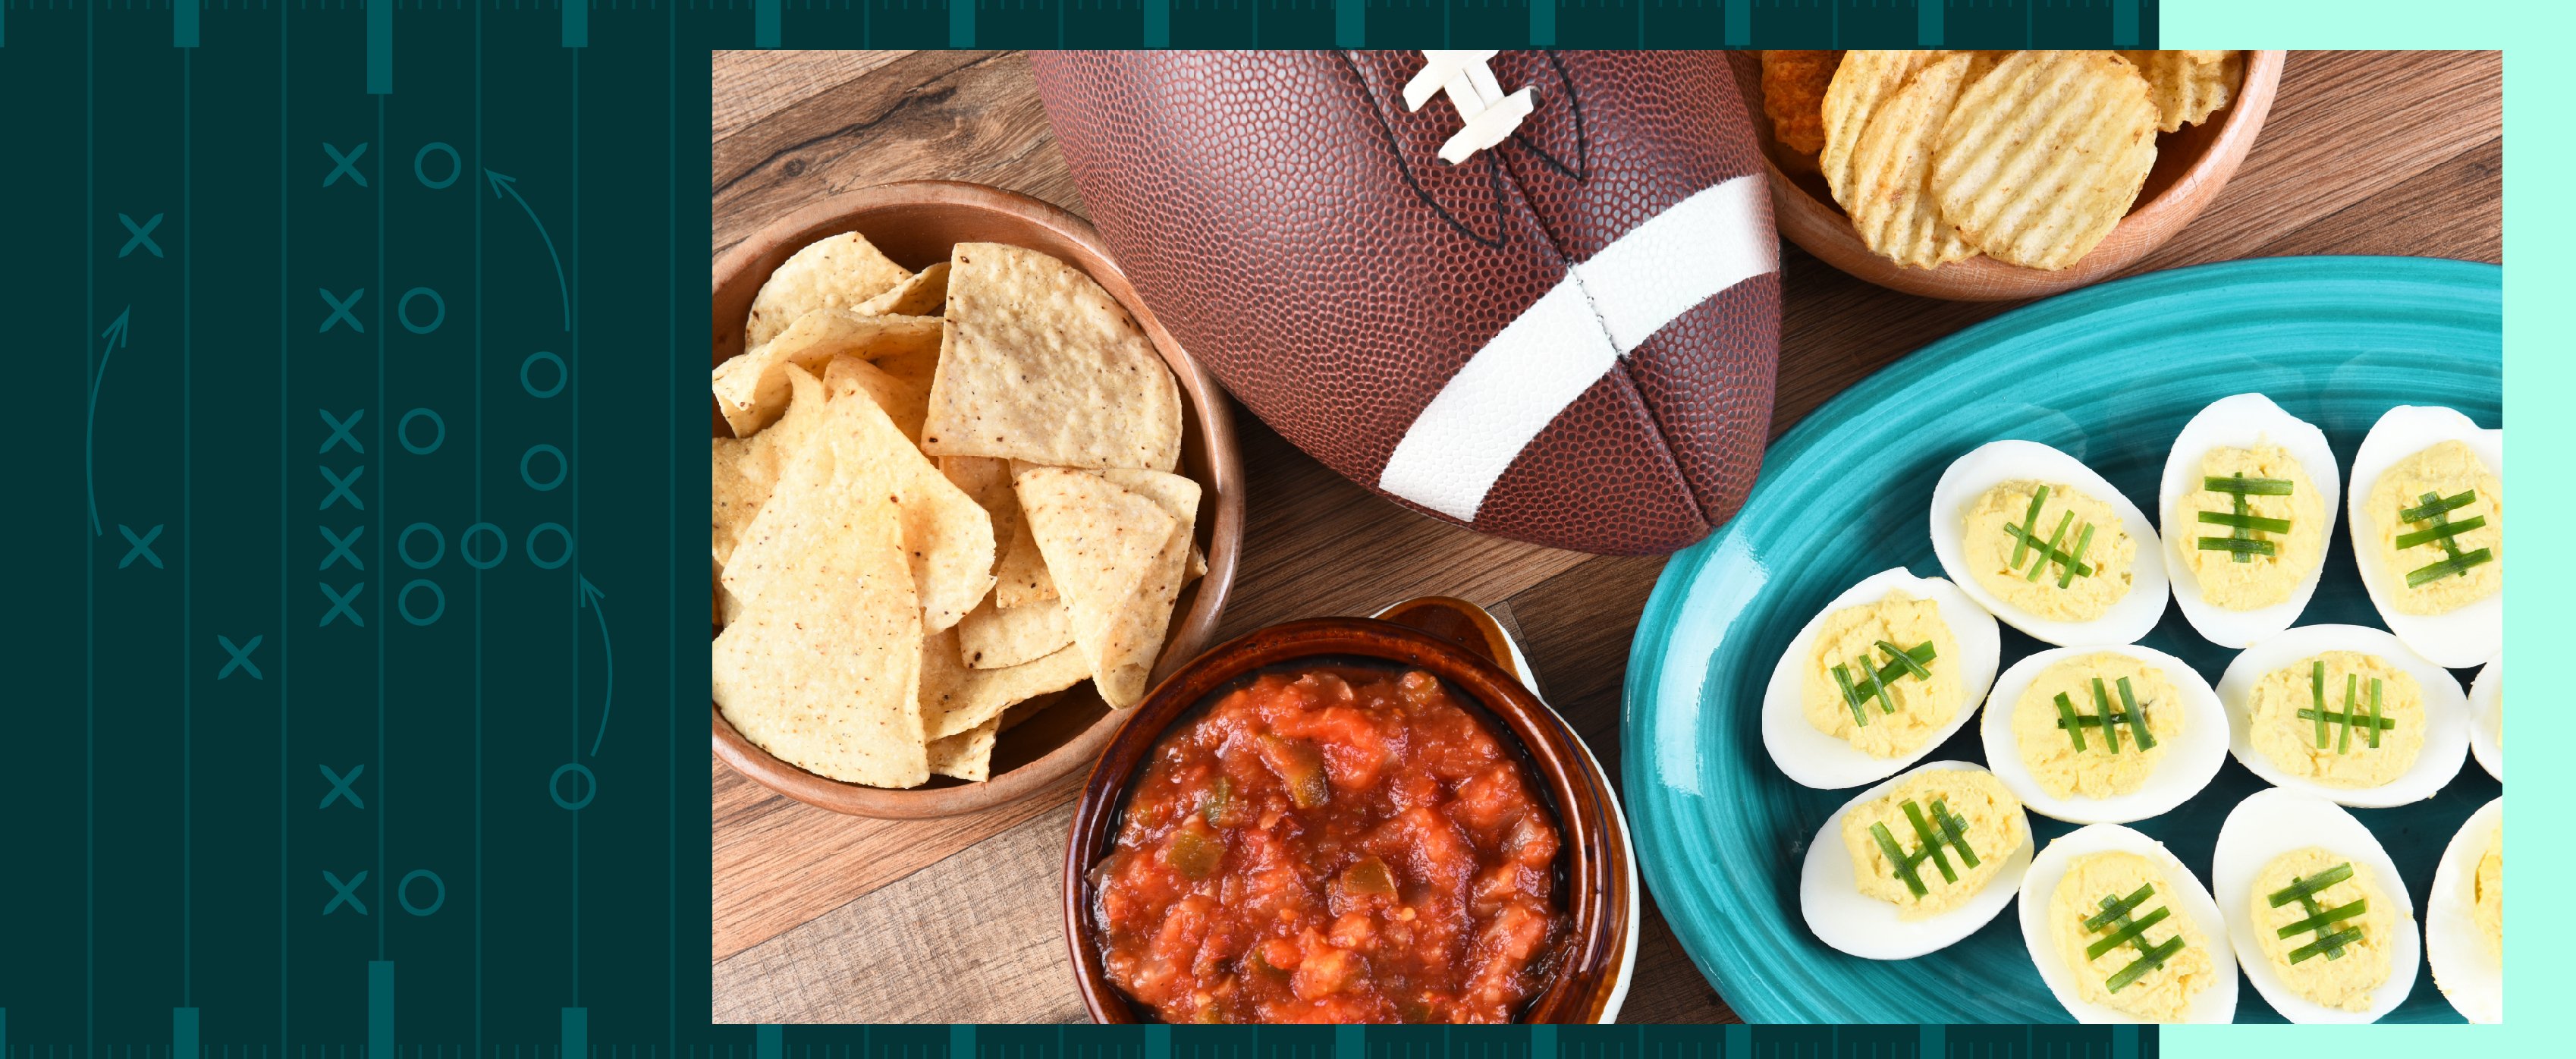 A table with a football, surrounded by tortilla and regular chips, salsa, and deviled eggs